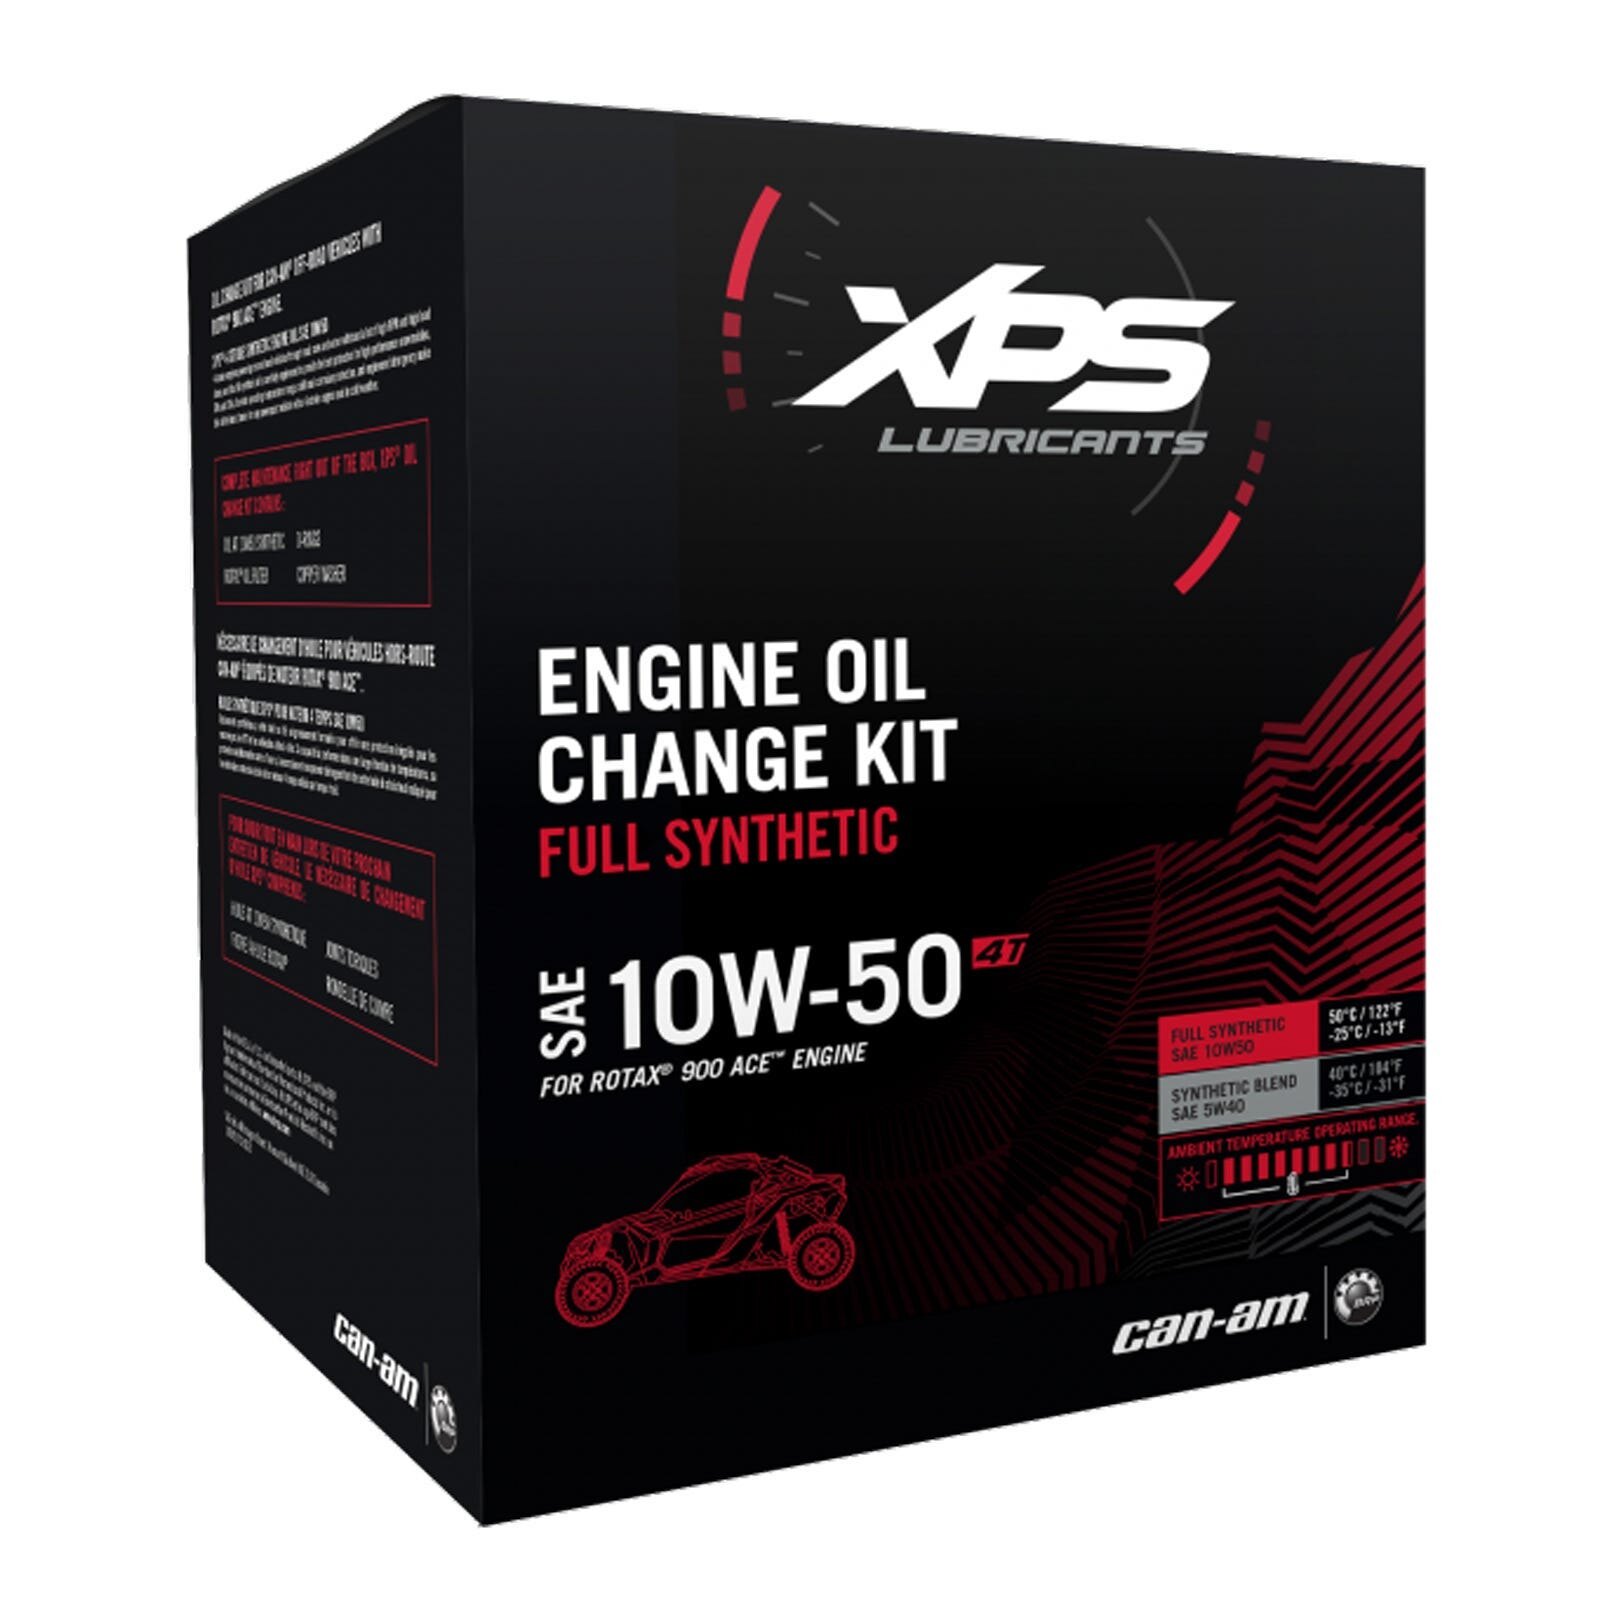 4T 10W 50 Synthetic Oil Change Kit for Rotax 900 ACE engine